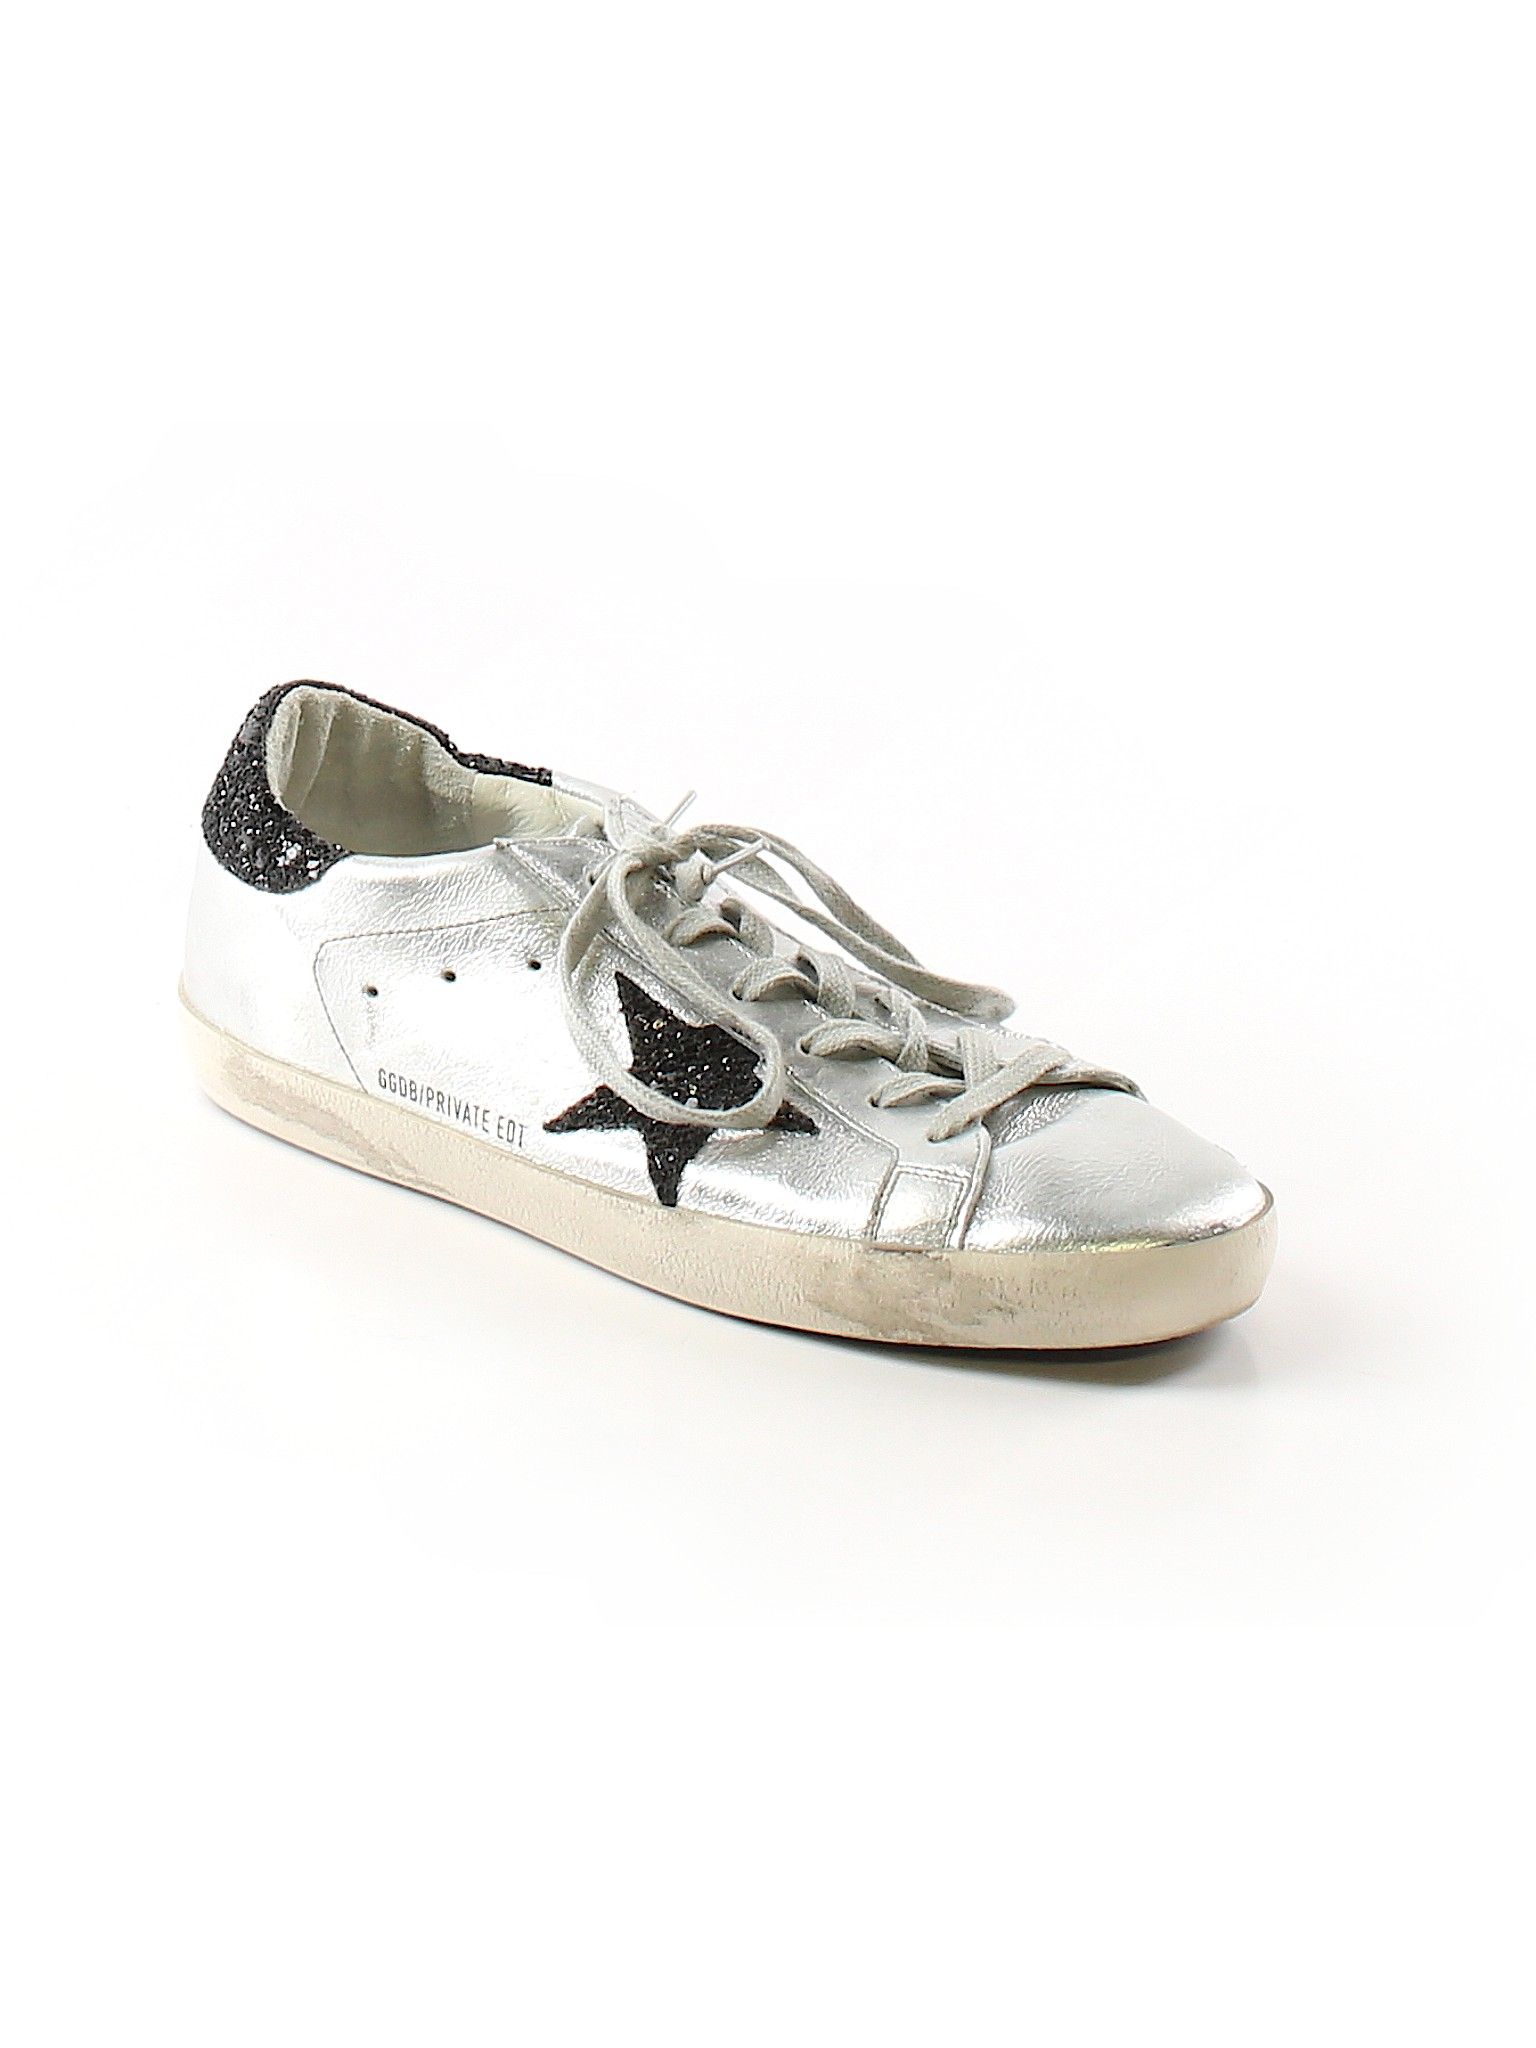 Golden Goose Sneakers Size 11: Silver Women's Clothing - 42924185 | thredUP